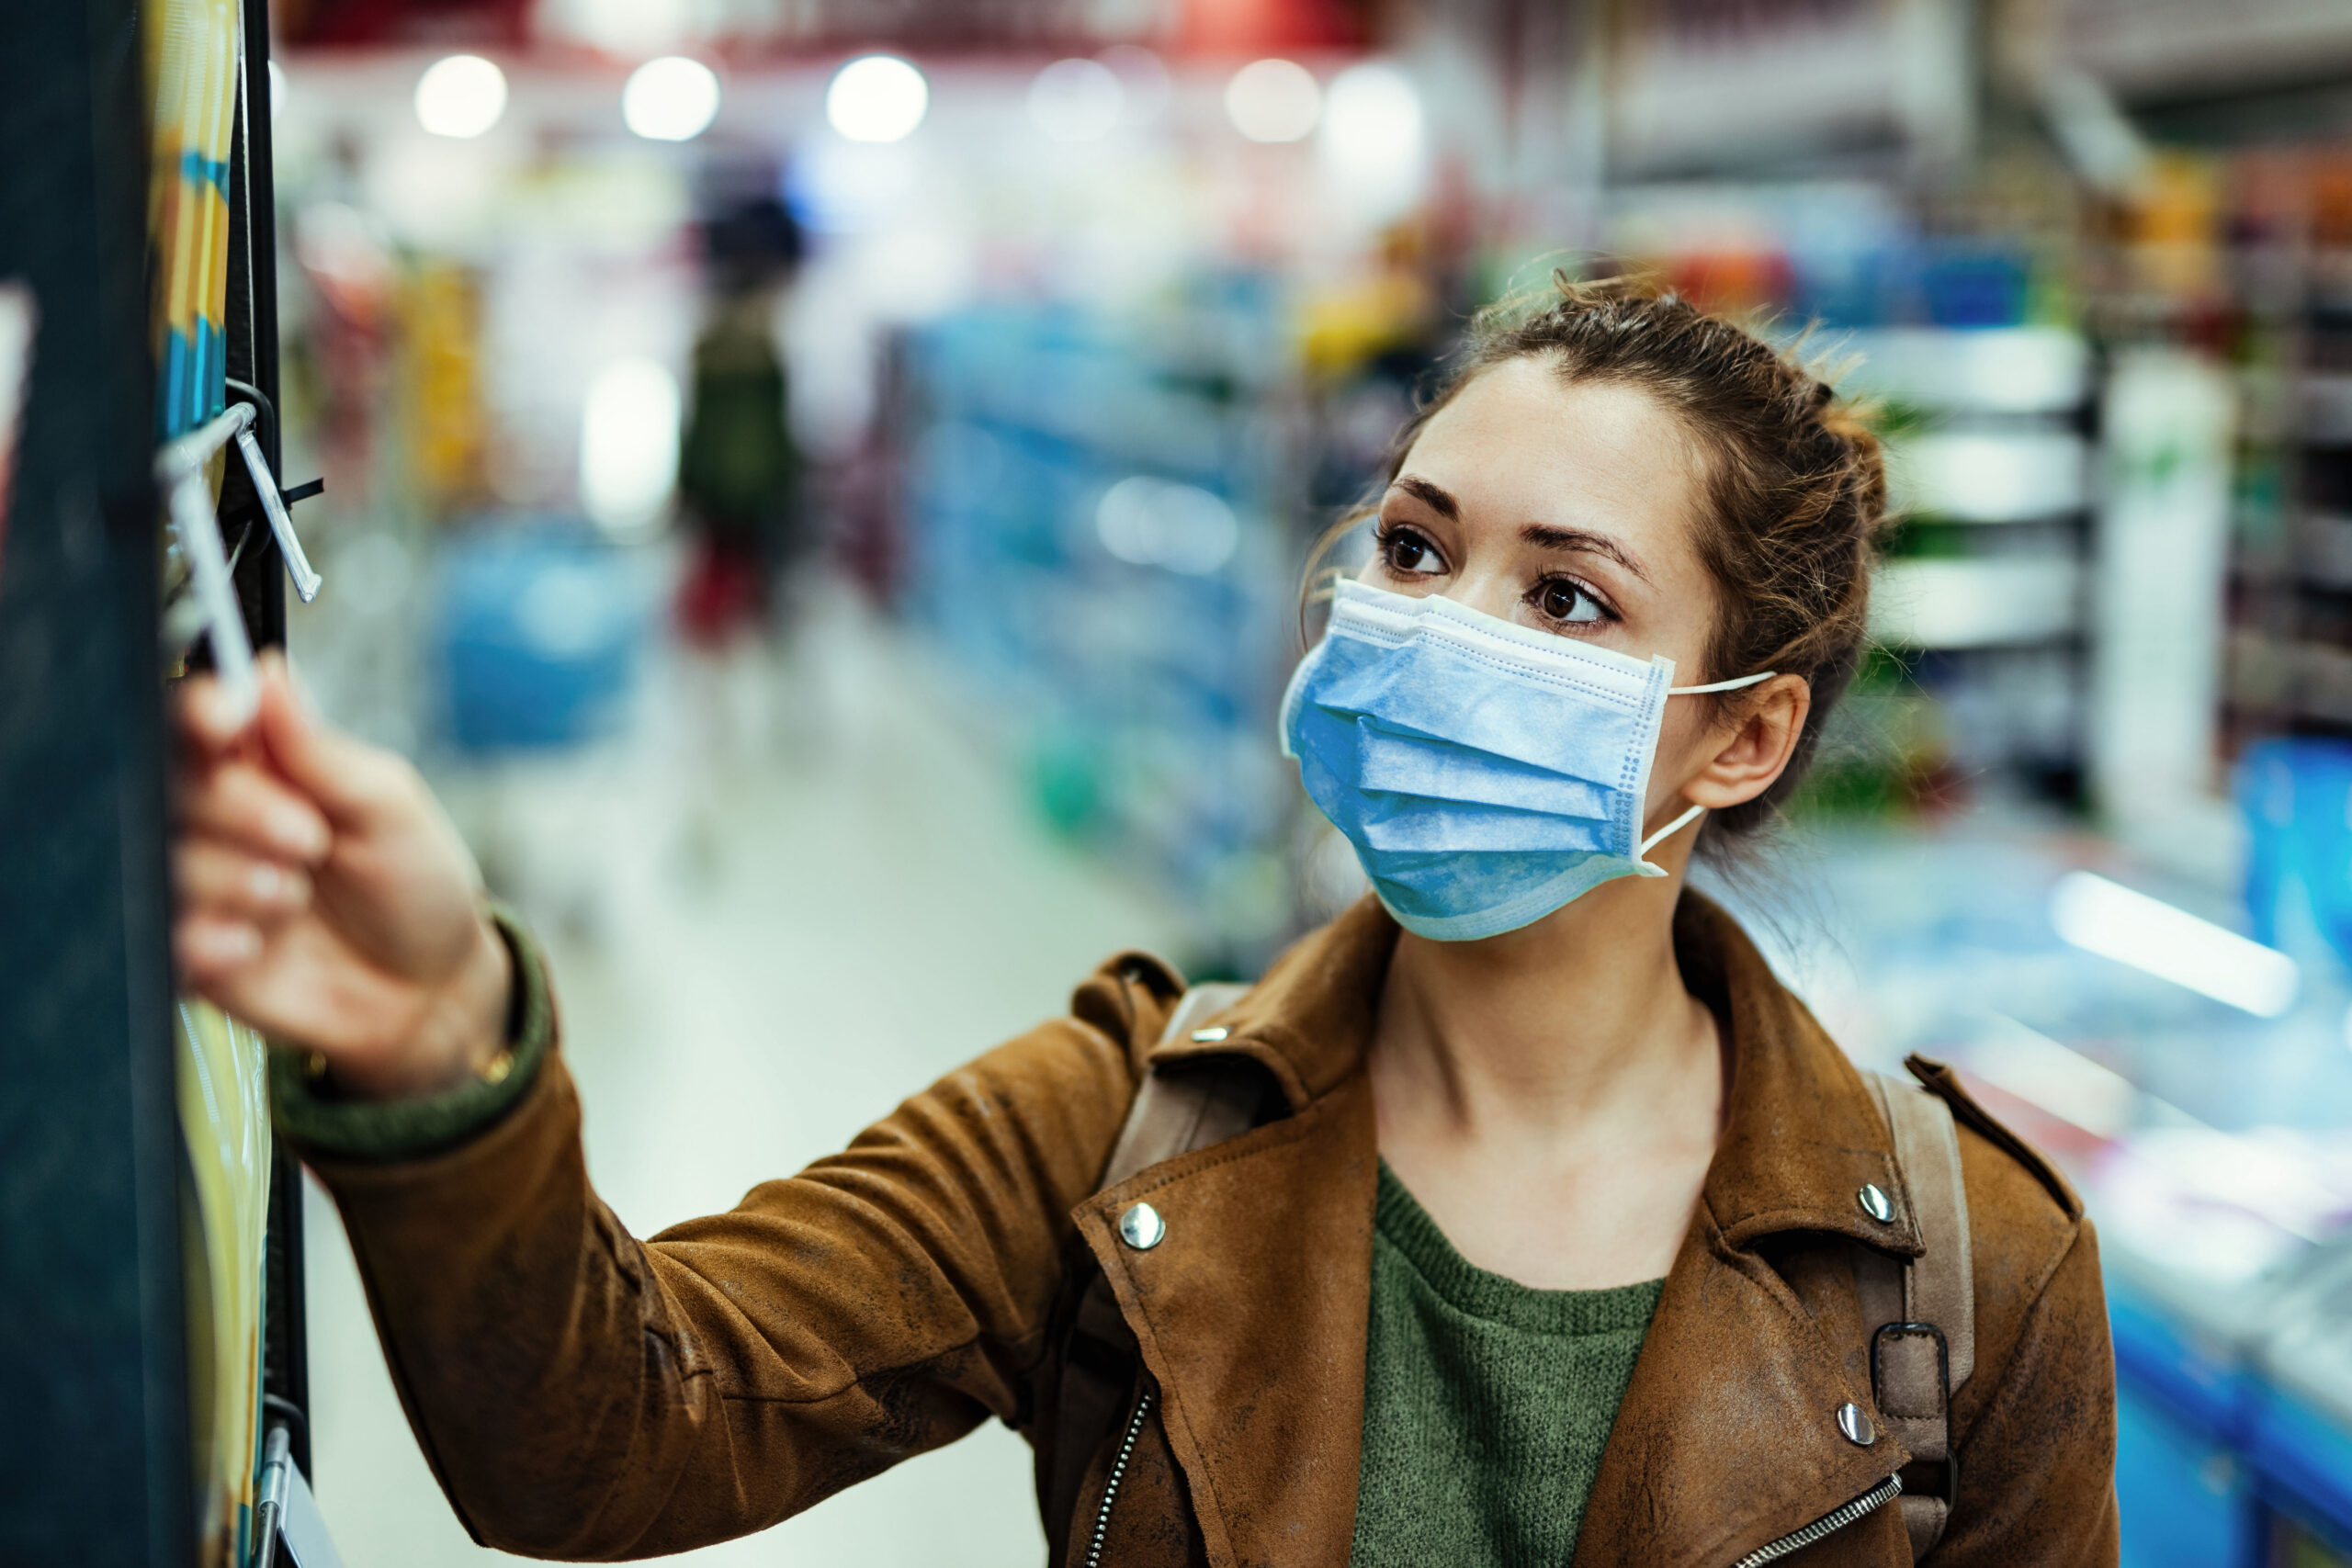 Young woman with protective mask on her face buying in supermarket during coronavirus pandemic.